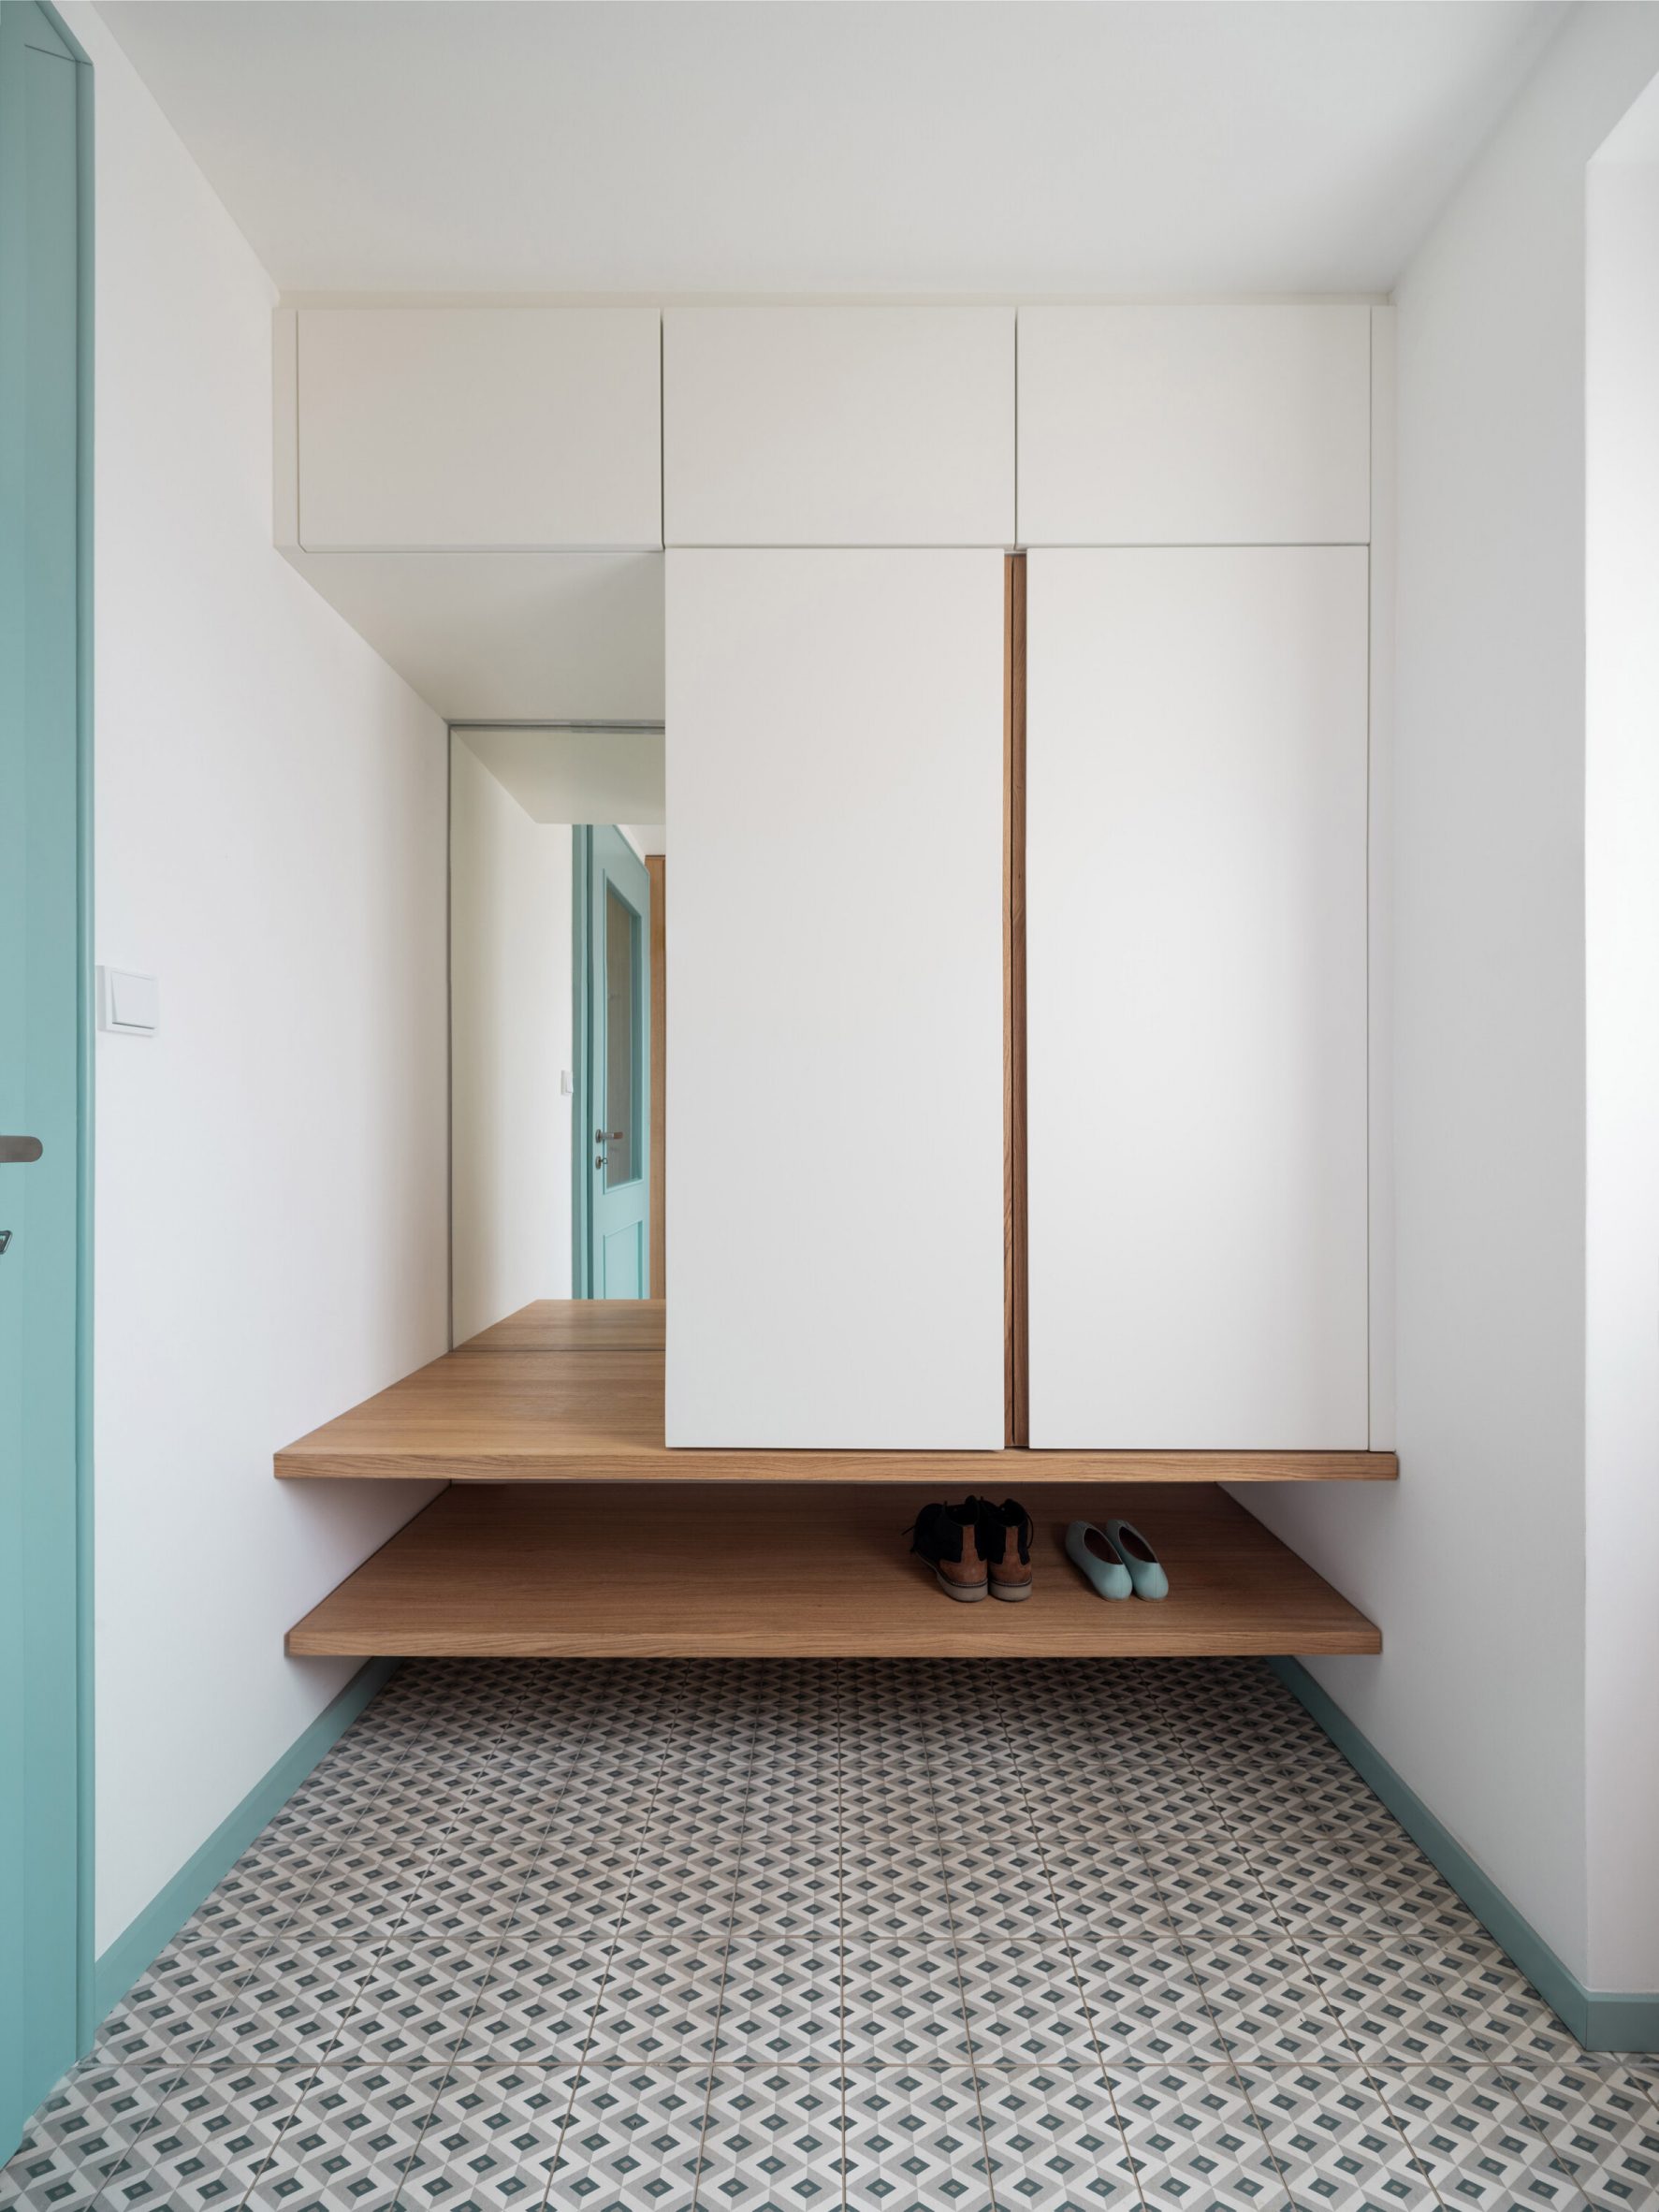 Bespoke shelving and cupboard at Under the Top House by No Architects